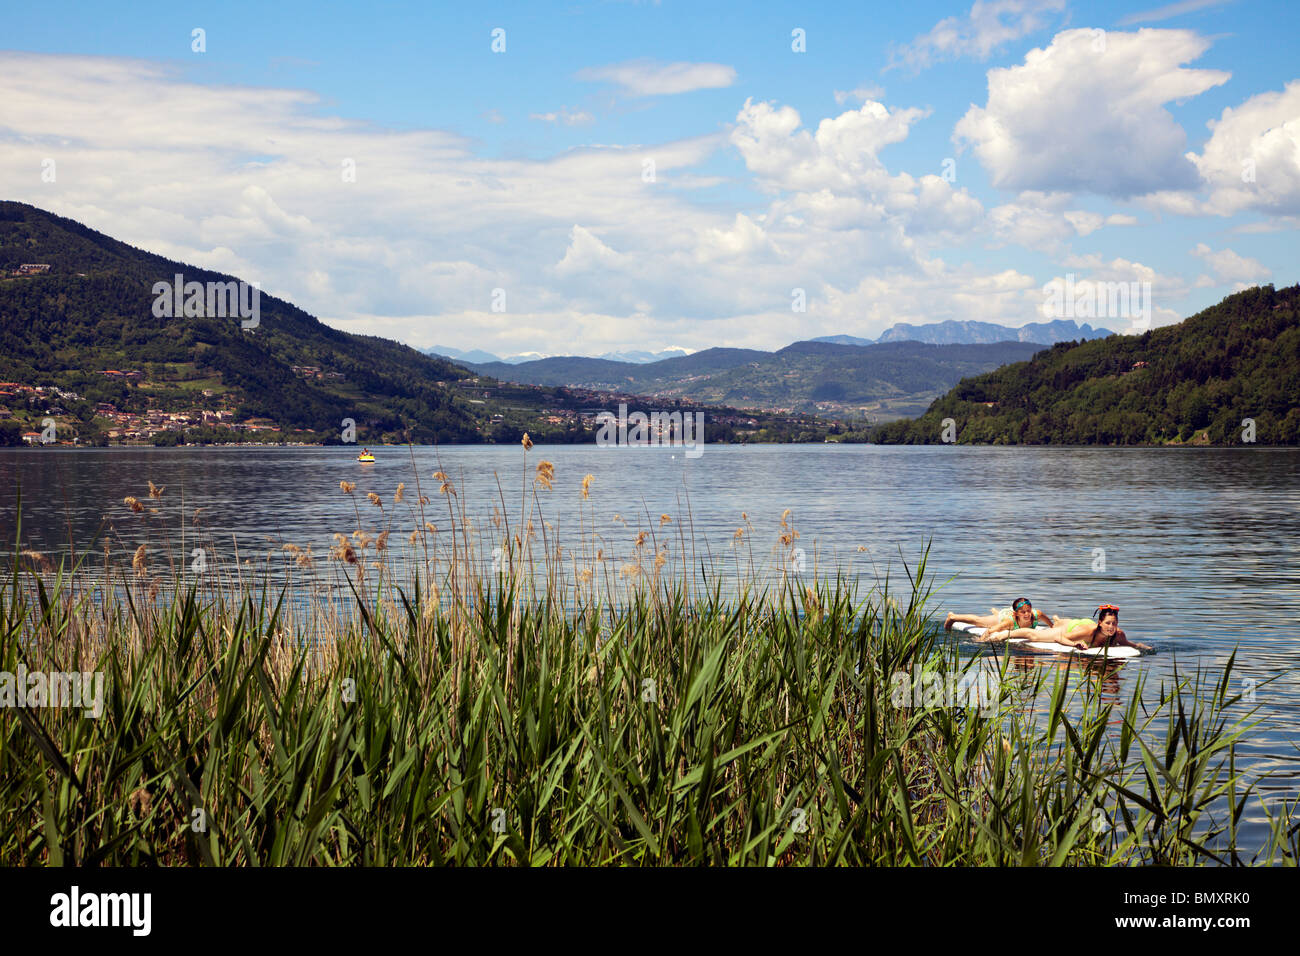 view across Lago di Caldonazzo, Trento, Italy, catttail reed and two girls paddling on surfboard in foreground Stock Photo